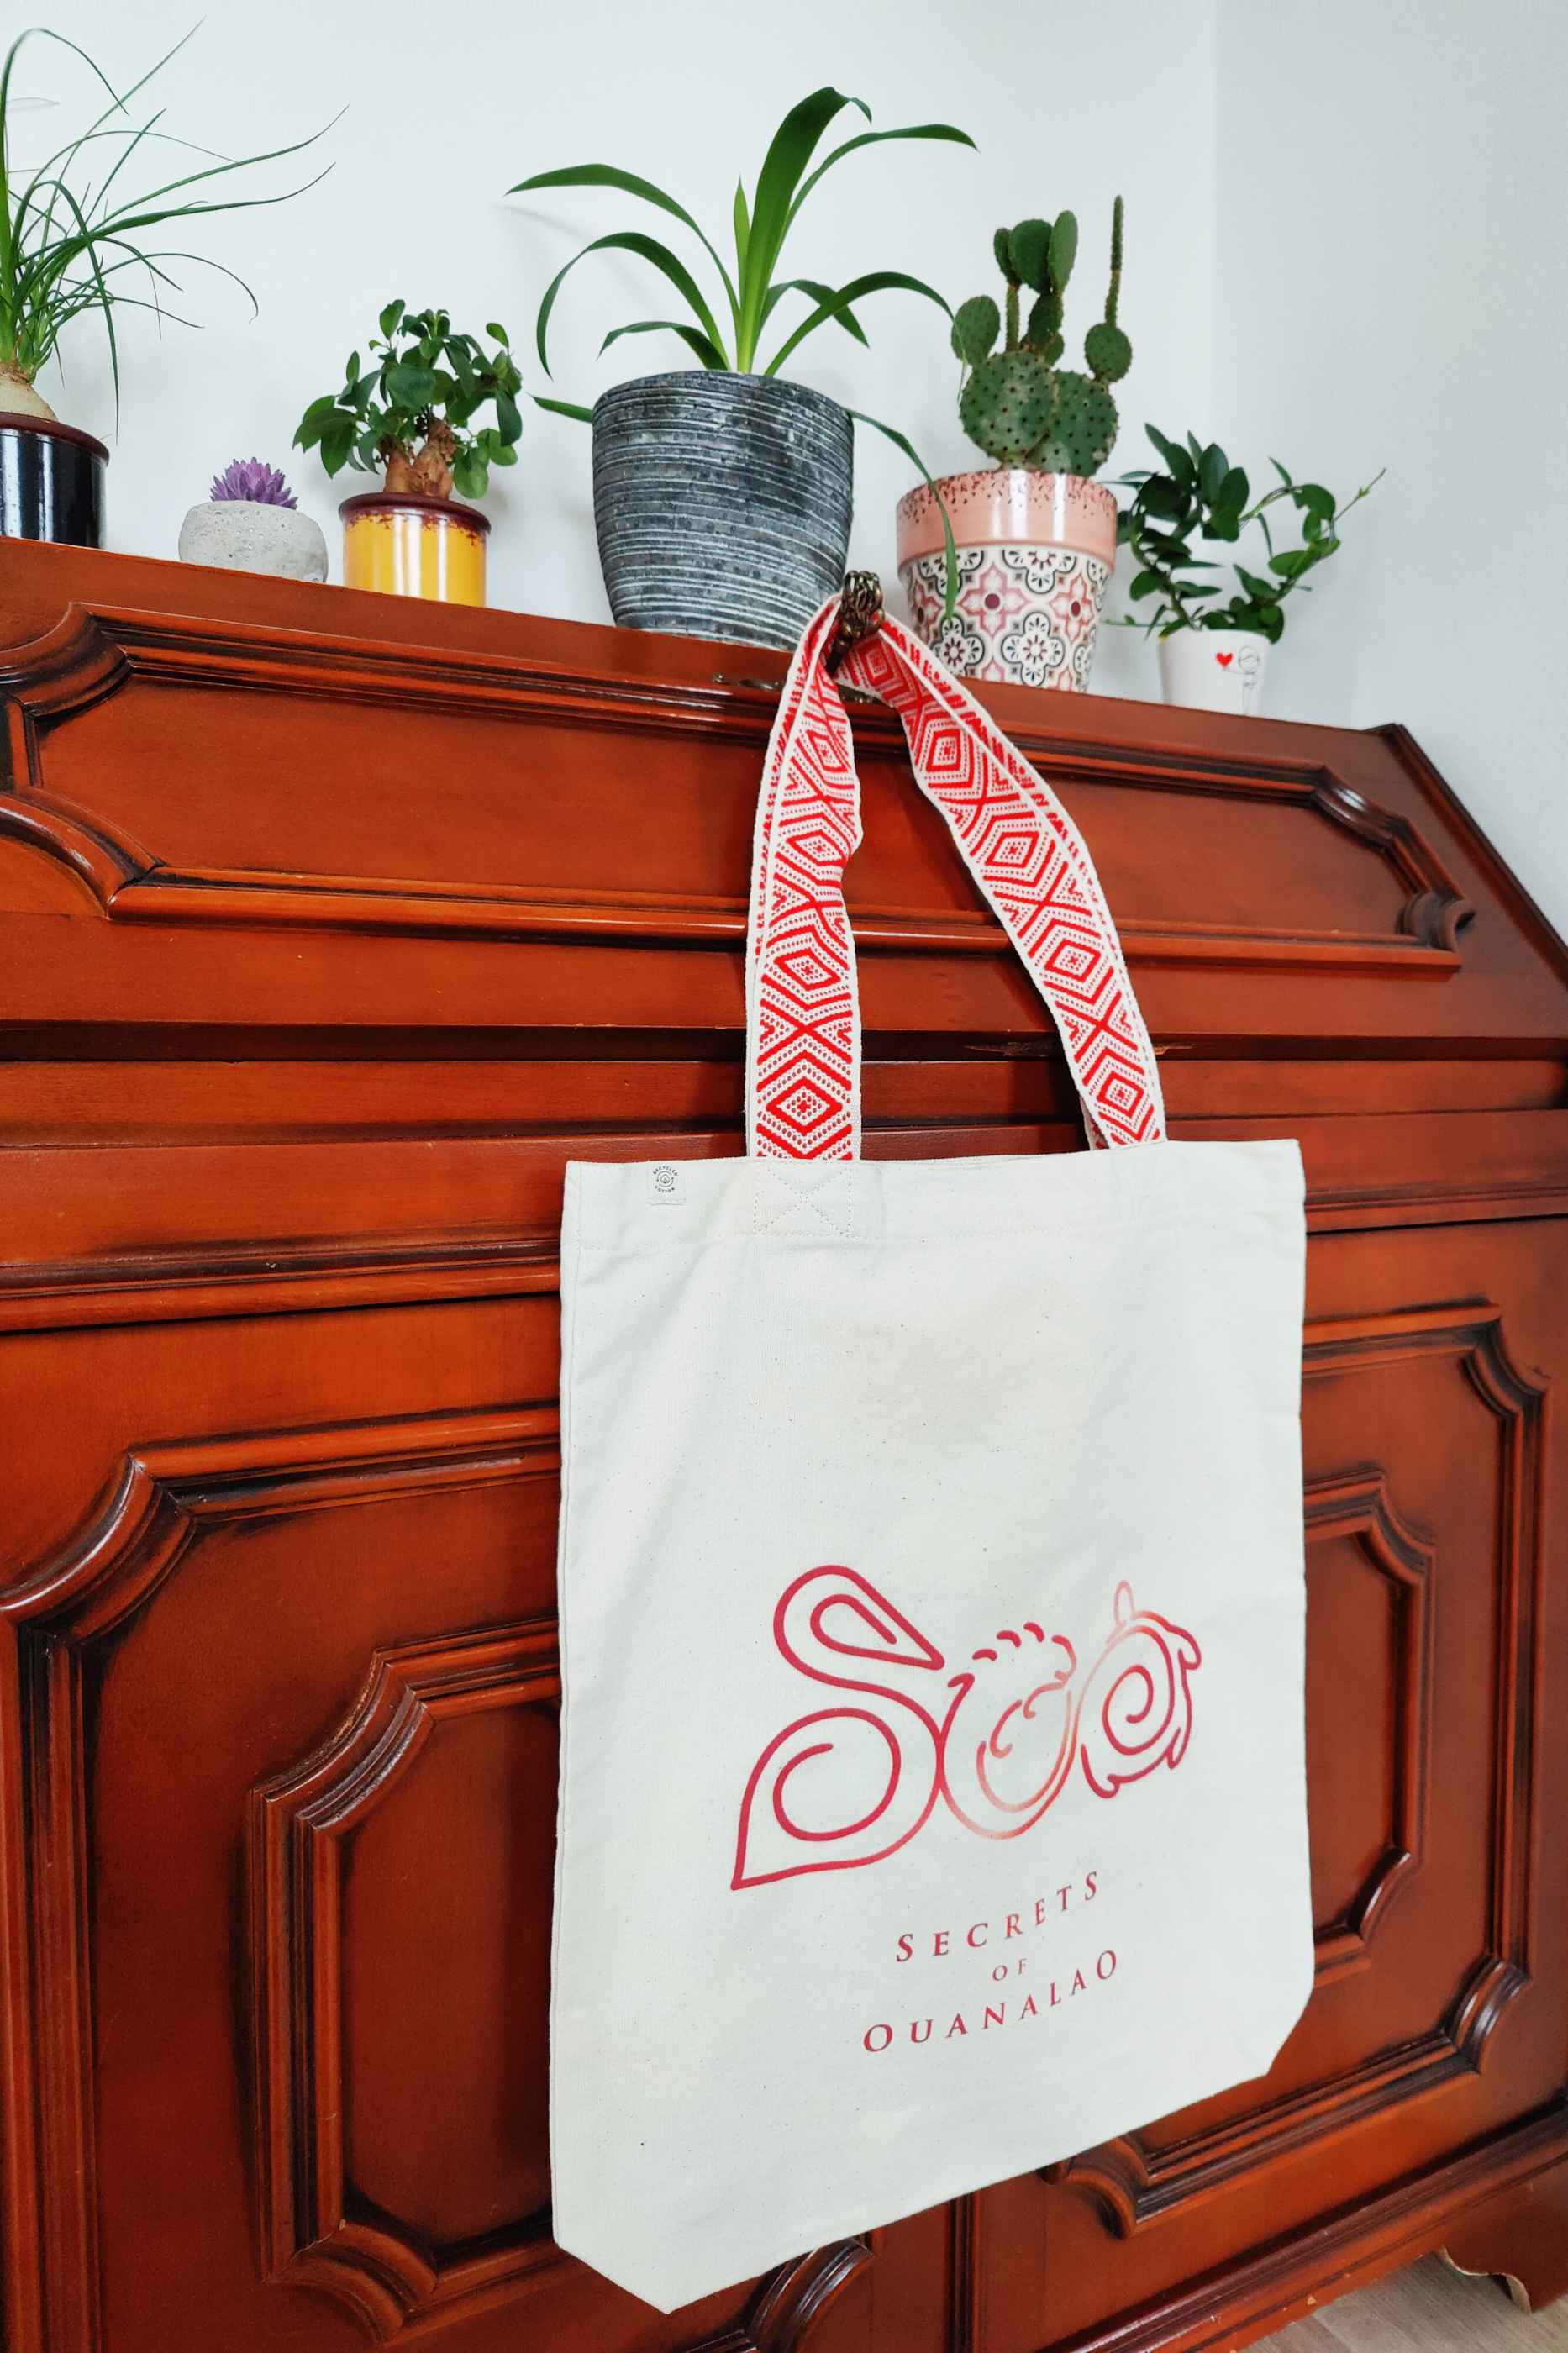 Vegan tote bag with red handles and logo, including inside zipper pocket. The tote bag is made of recycled cotton.